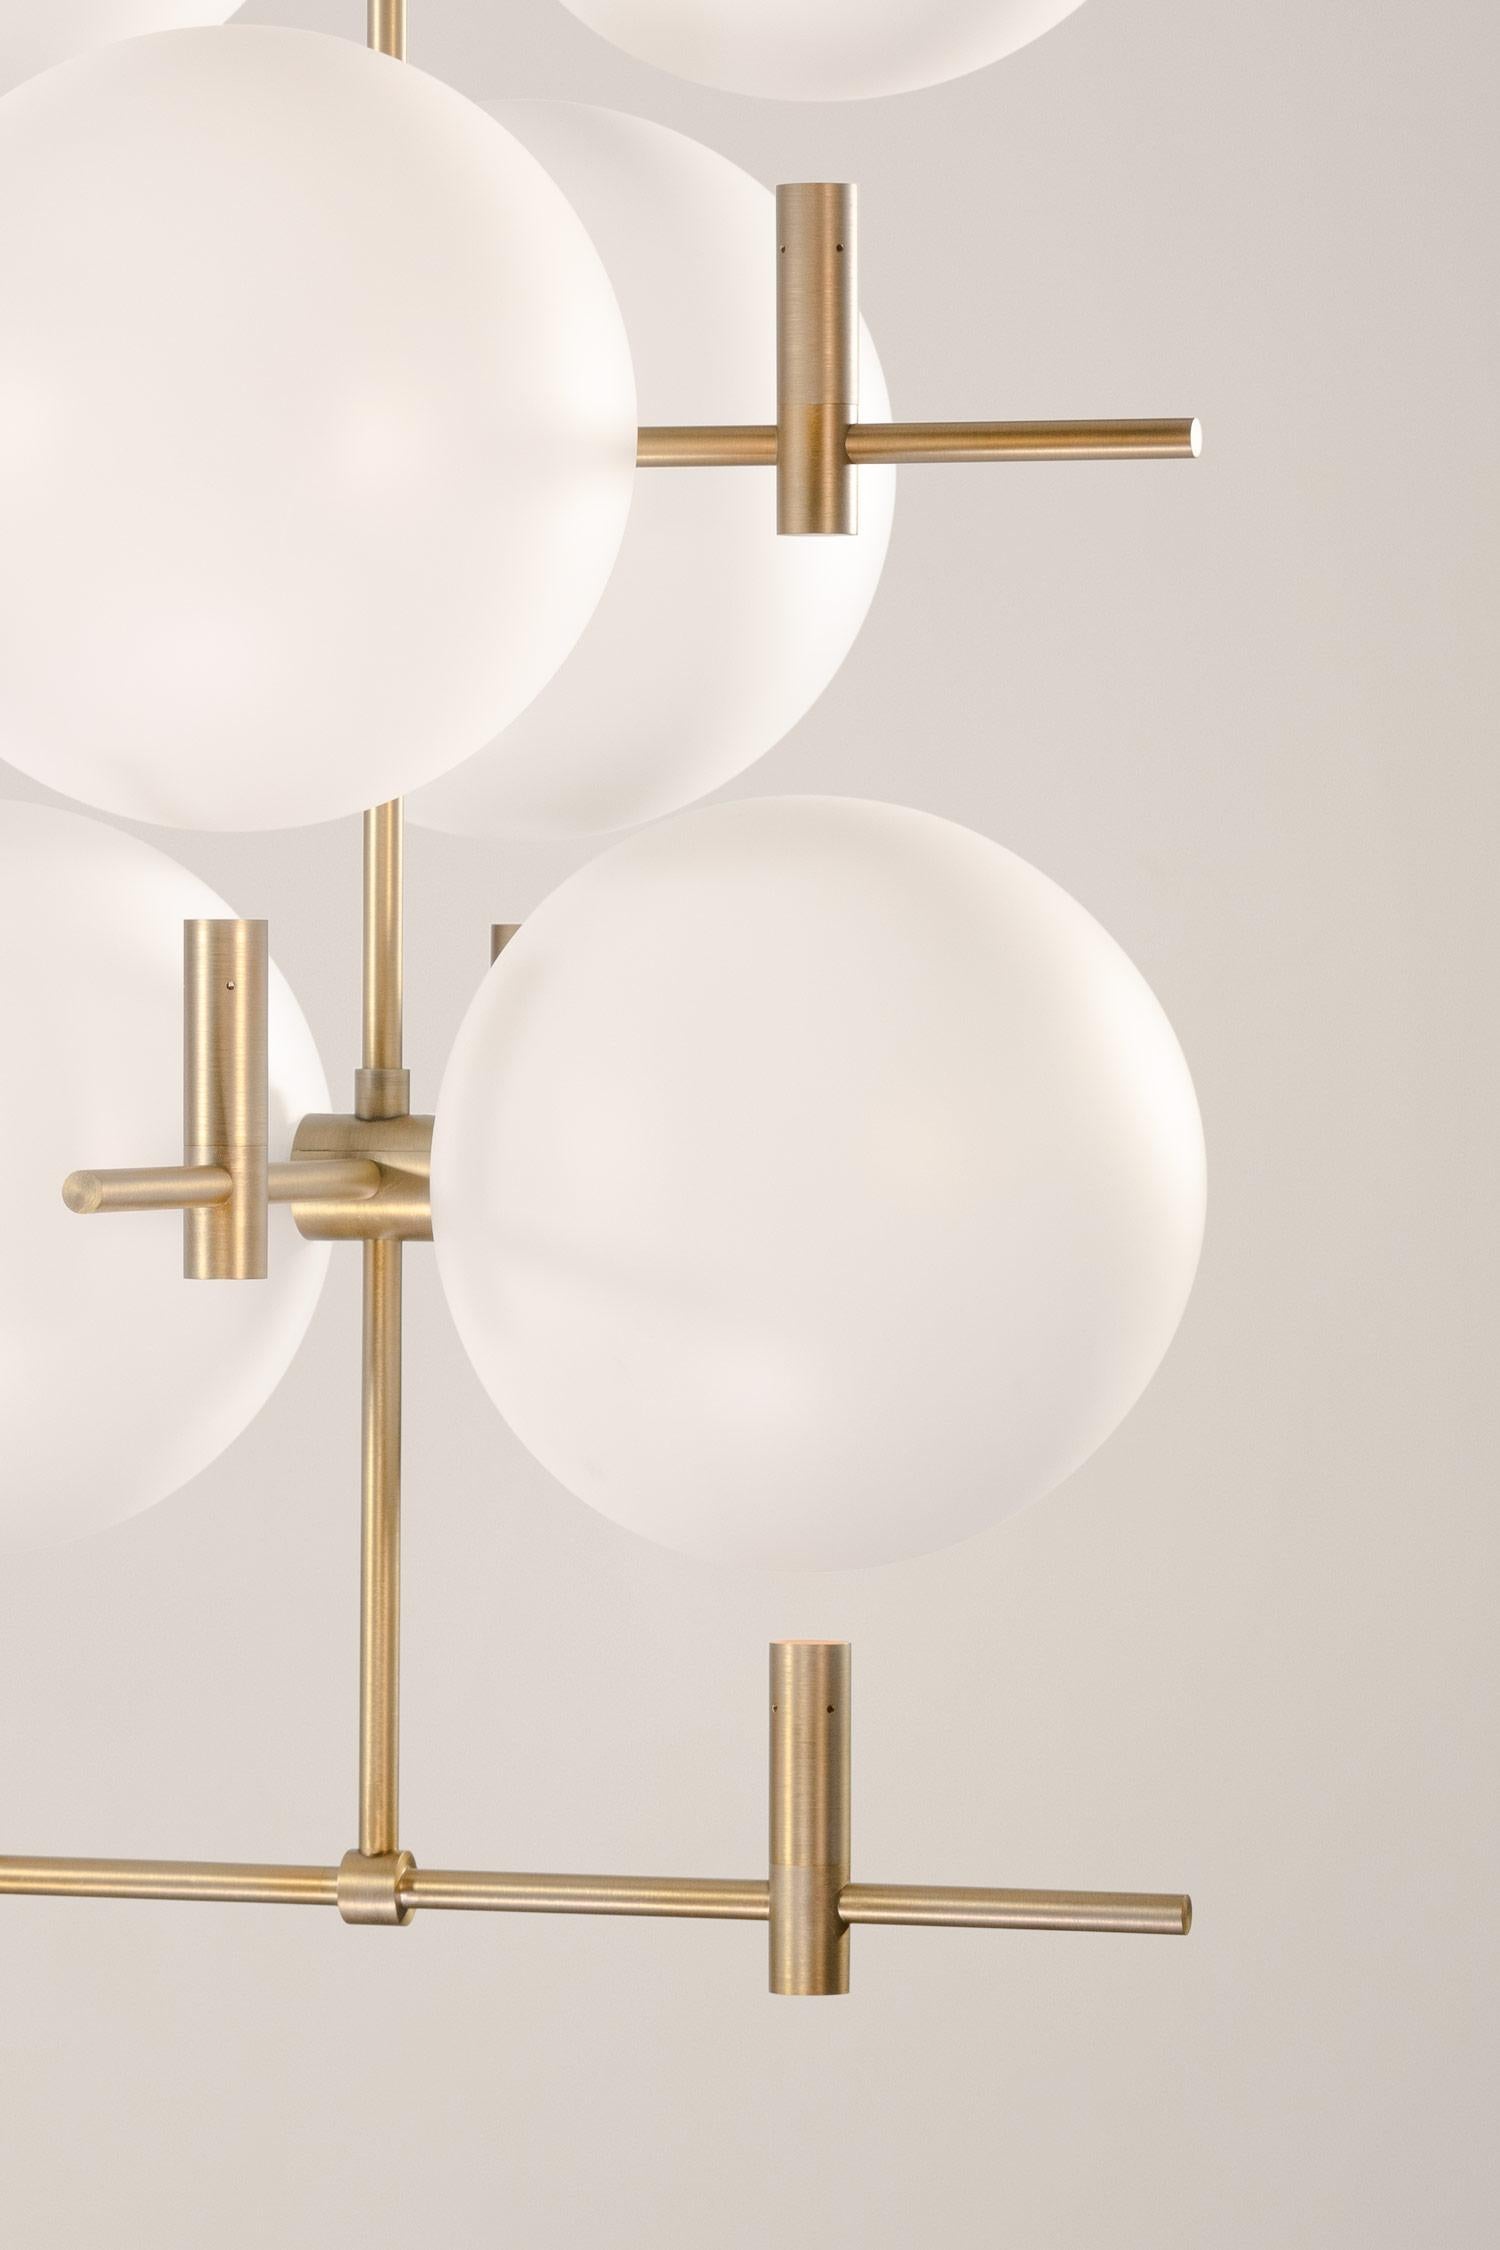 Czech Luna Luminaire / Chandelier Vertical I08 in Brushed Gold For Sale